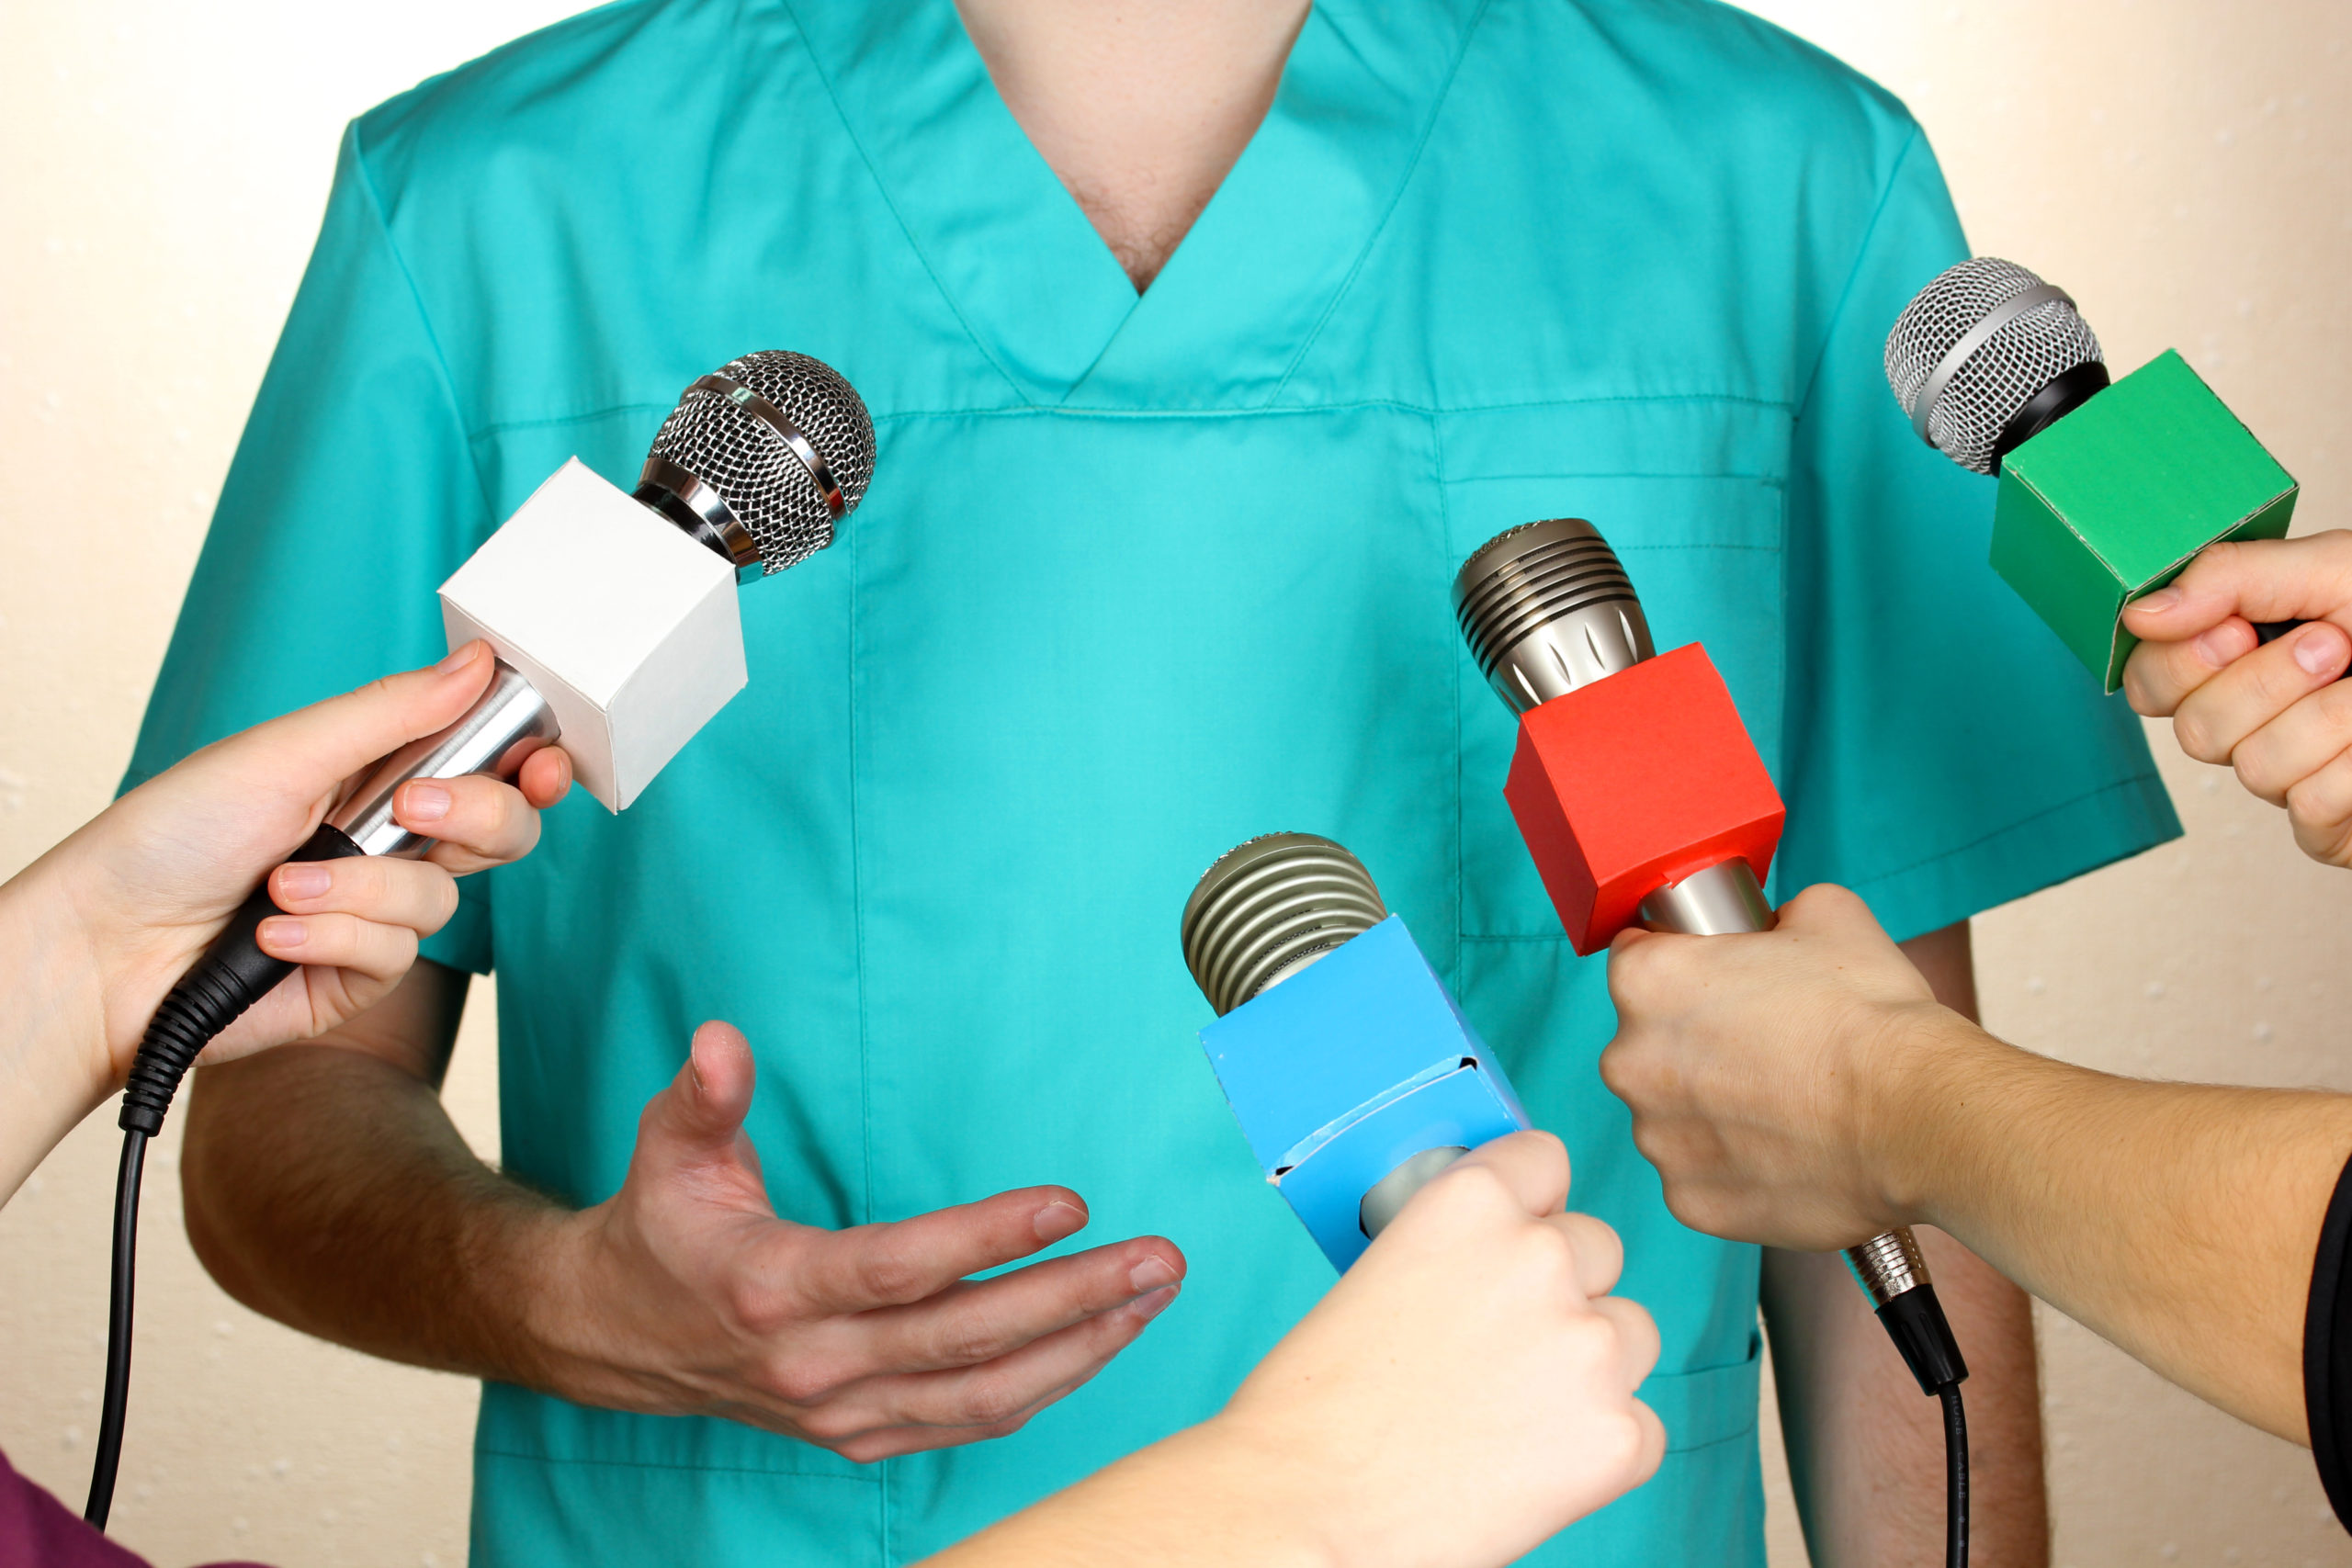 How to involve healthcare professionals in earned media campaigns